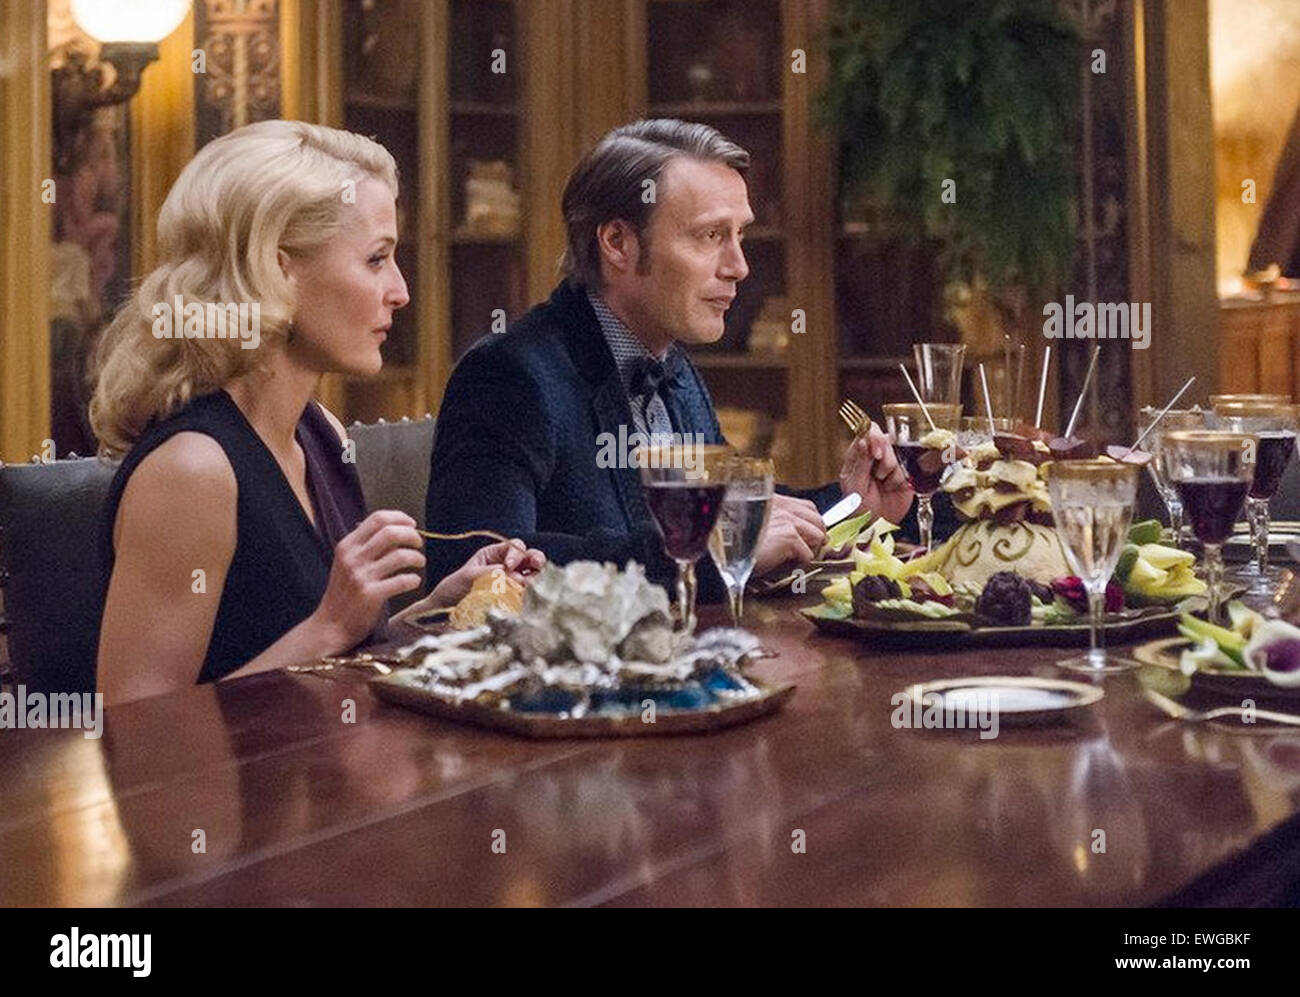 HANNIBAL NBCUniversal Media TV series with Gillian Anderson and Mads Mikkelsen Stock Photo